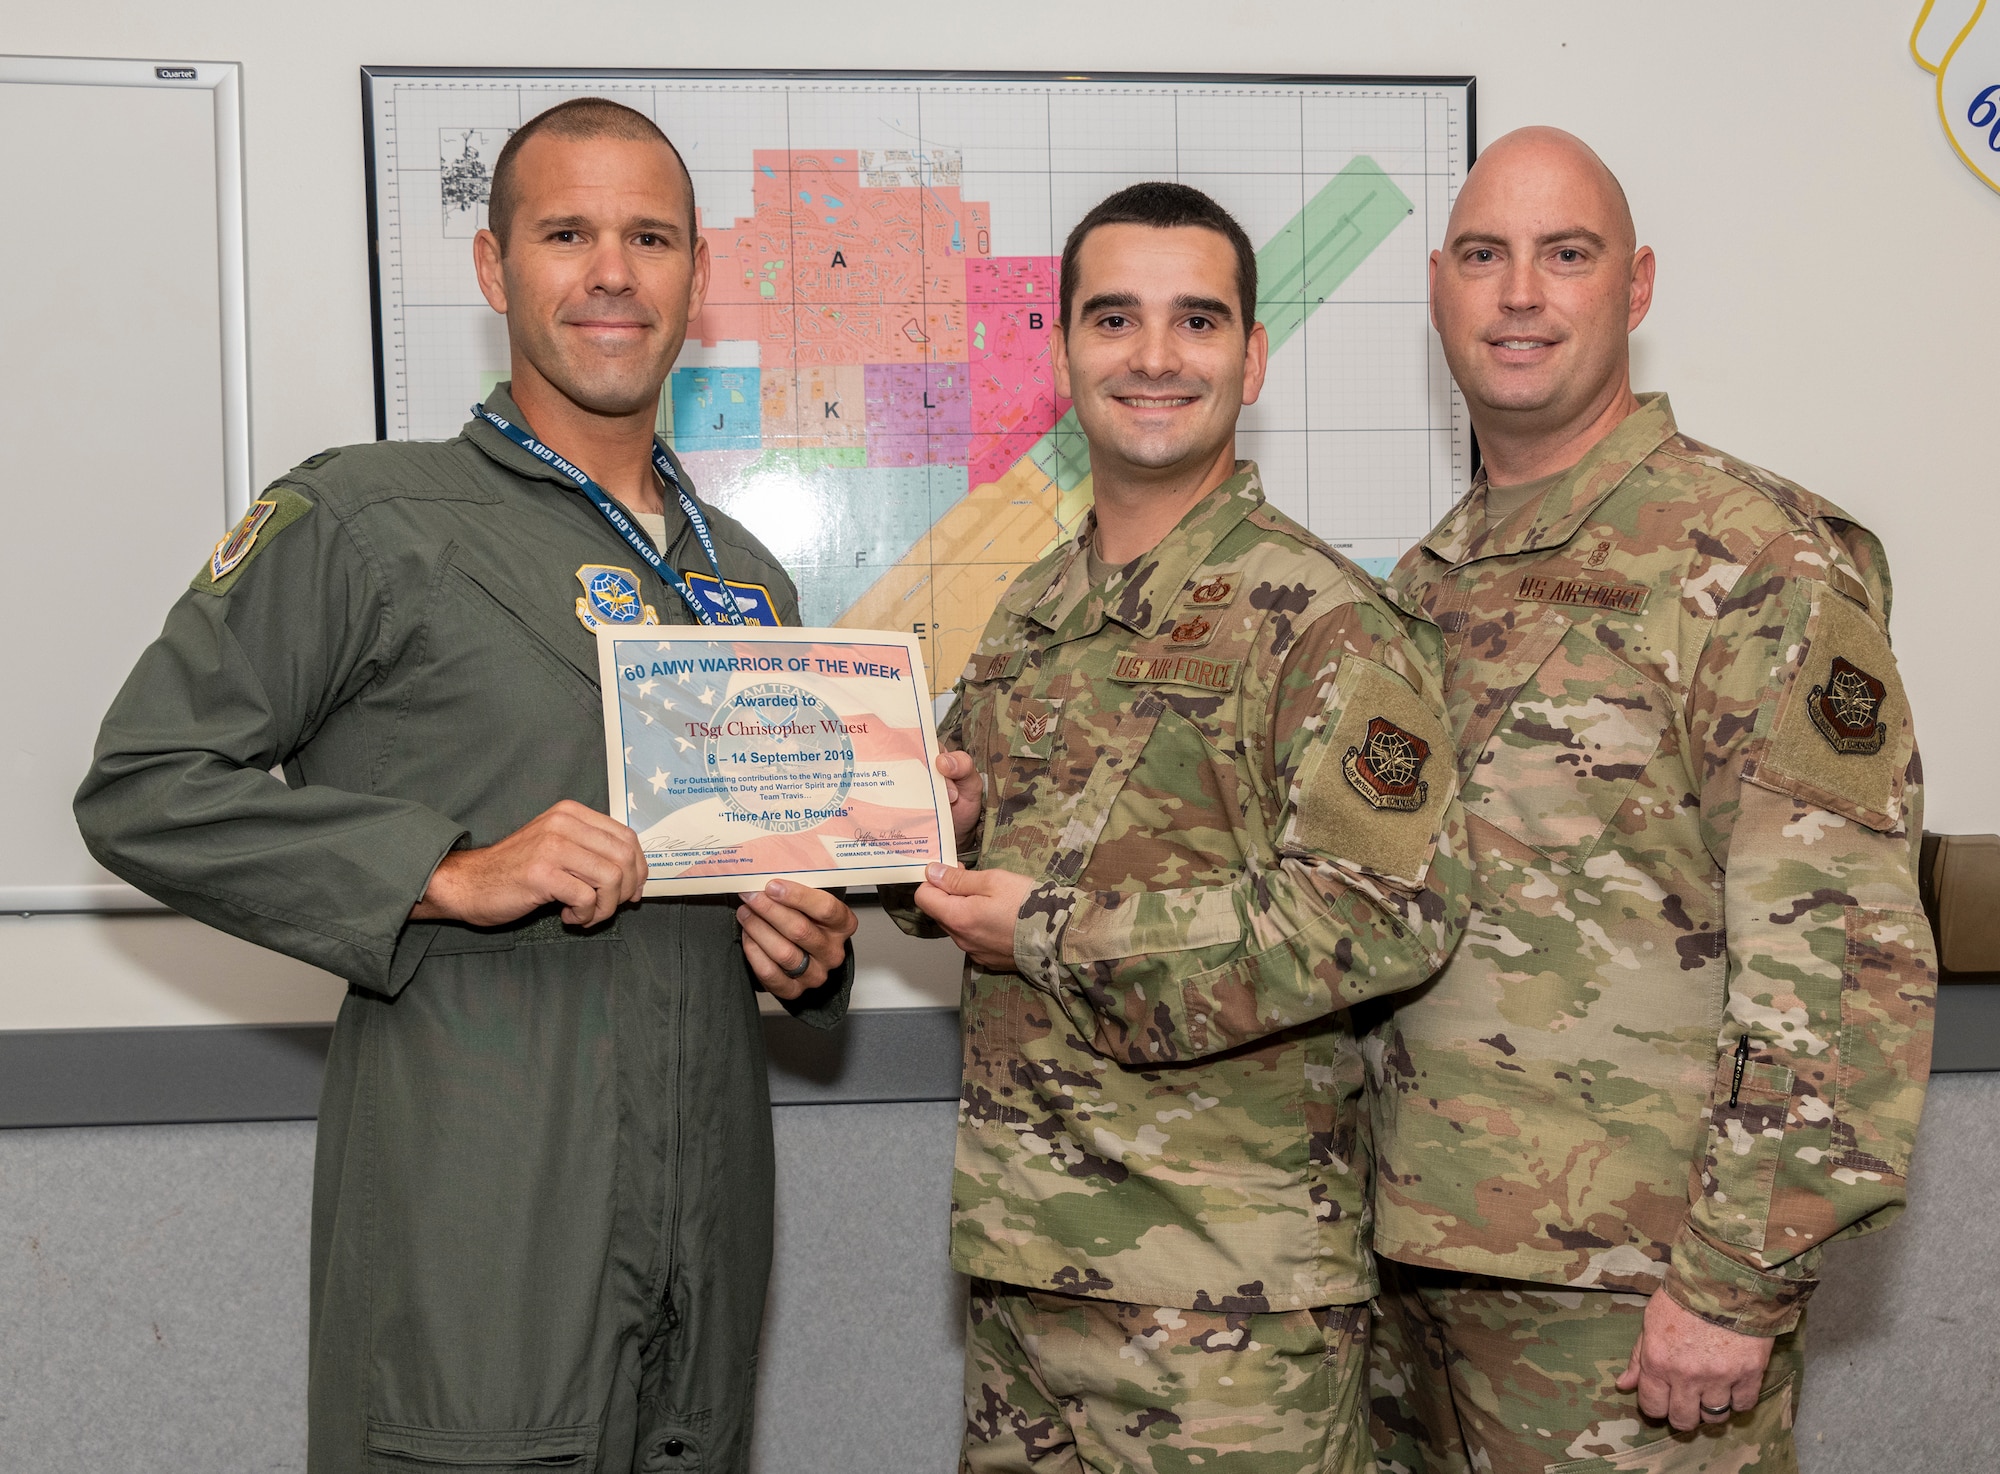 U.S. Air Force Col. Zachery Jiron, left, 60th Air Mobility Wing, vice commander, and Chief Master Sgt. Vincent Brass, right, 60th Medical Group superintendent, recognize Tech. Sgt. Christopher Wuest, 60th AMW Command Post NCO in charge command and control operations reports, as the Warrior of the Week Sept. 10, 2019 at Travis Air Force Base, California. The Warrior of the Week program recognizes an outstanding Travis Airman or noncommissioned officer. (U.S. Air Force photo by Heide Couch)